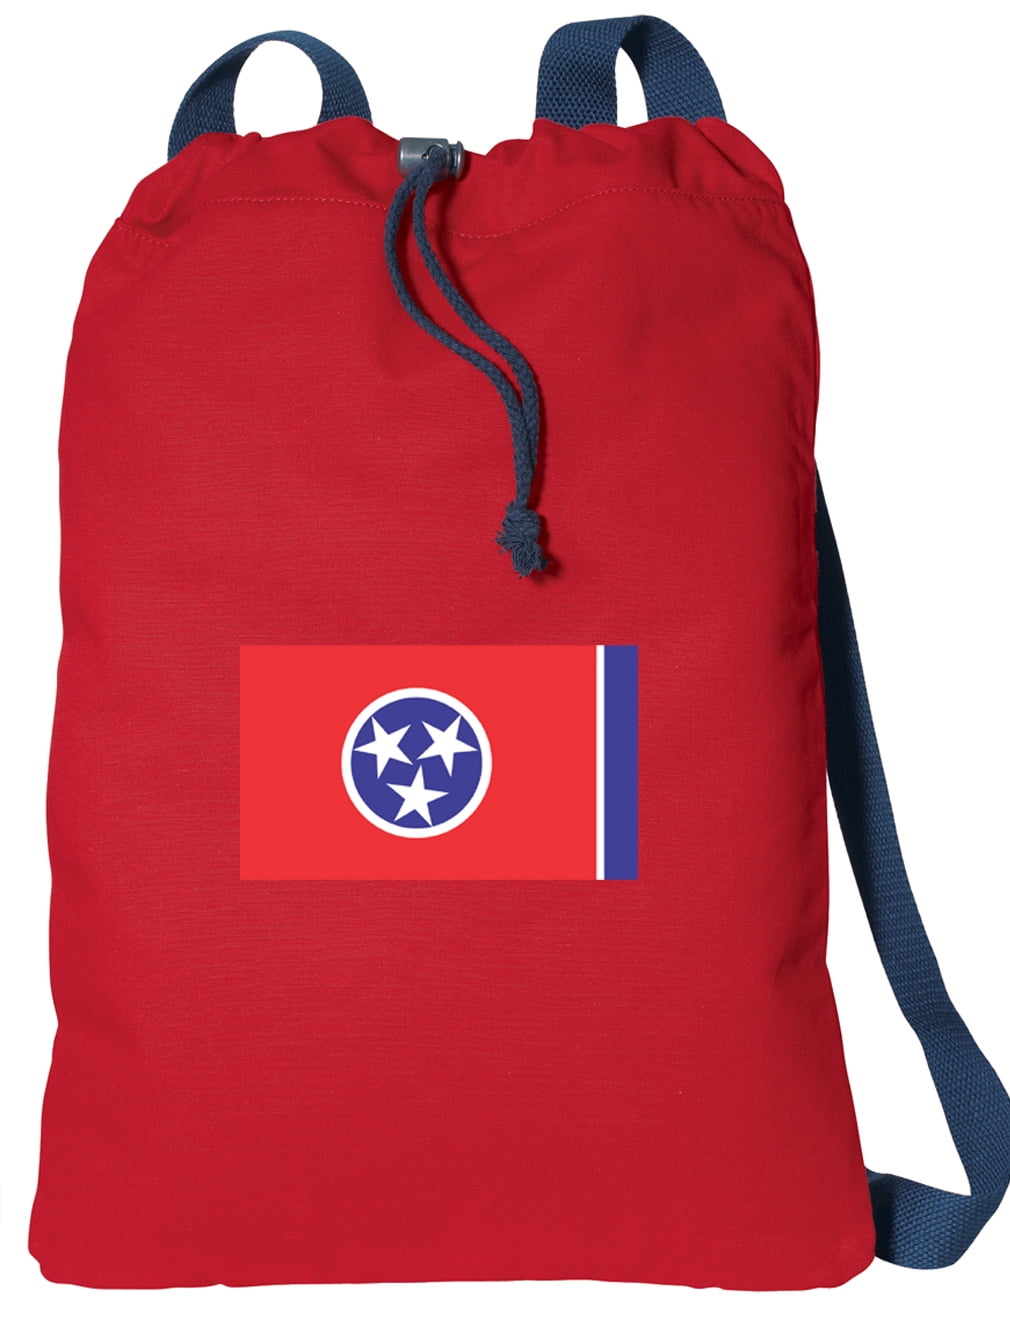 Tennessee Tote Bag CUTE Tennessee Flag Shoulder Bag Sling Style